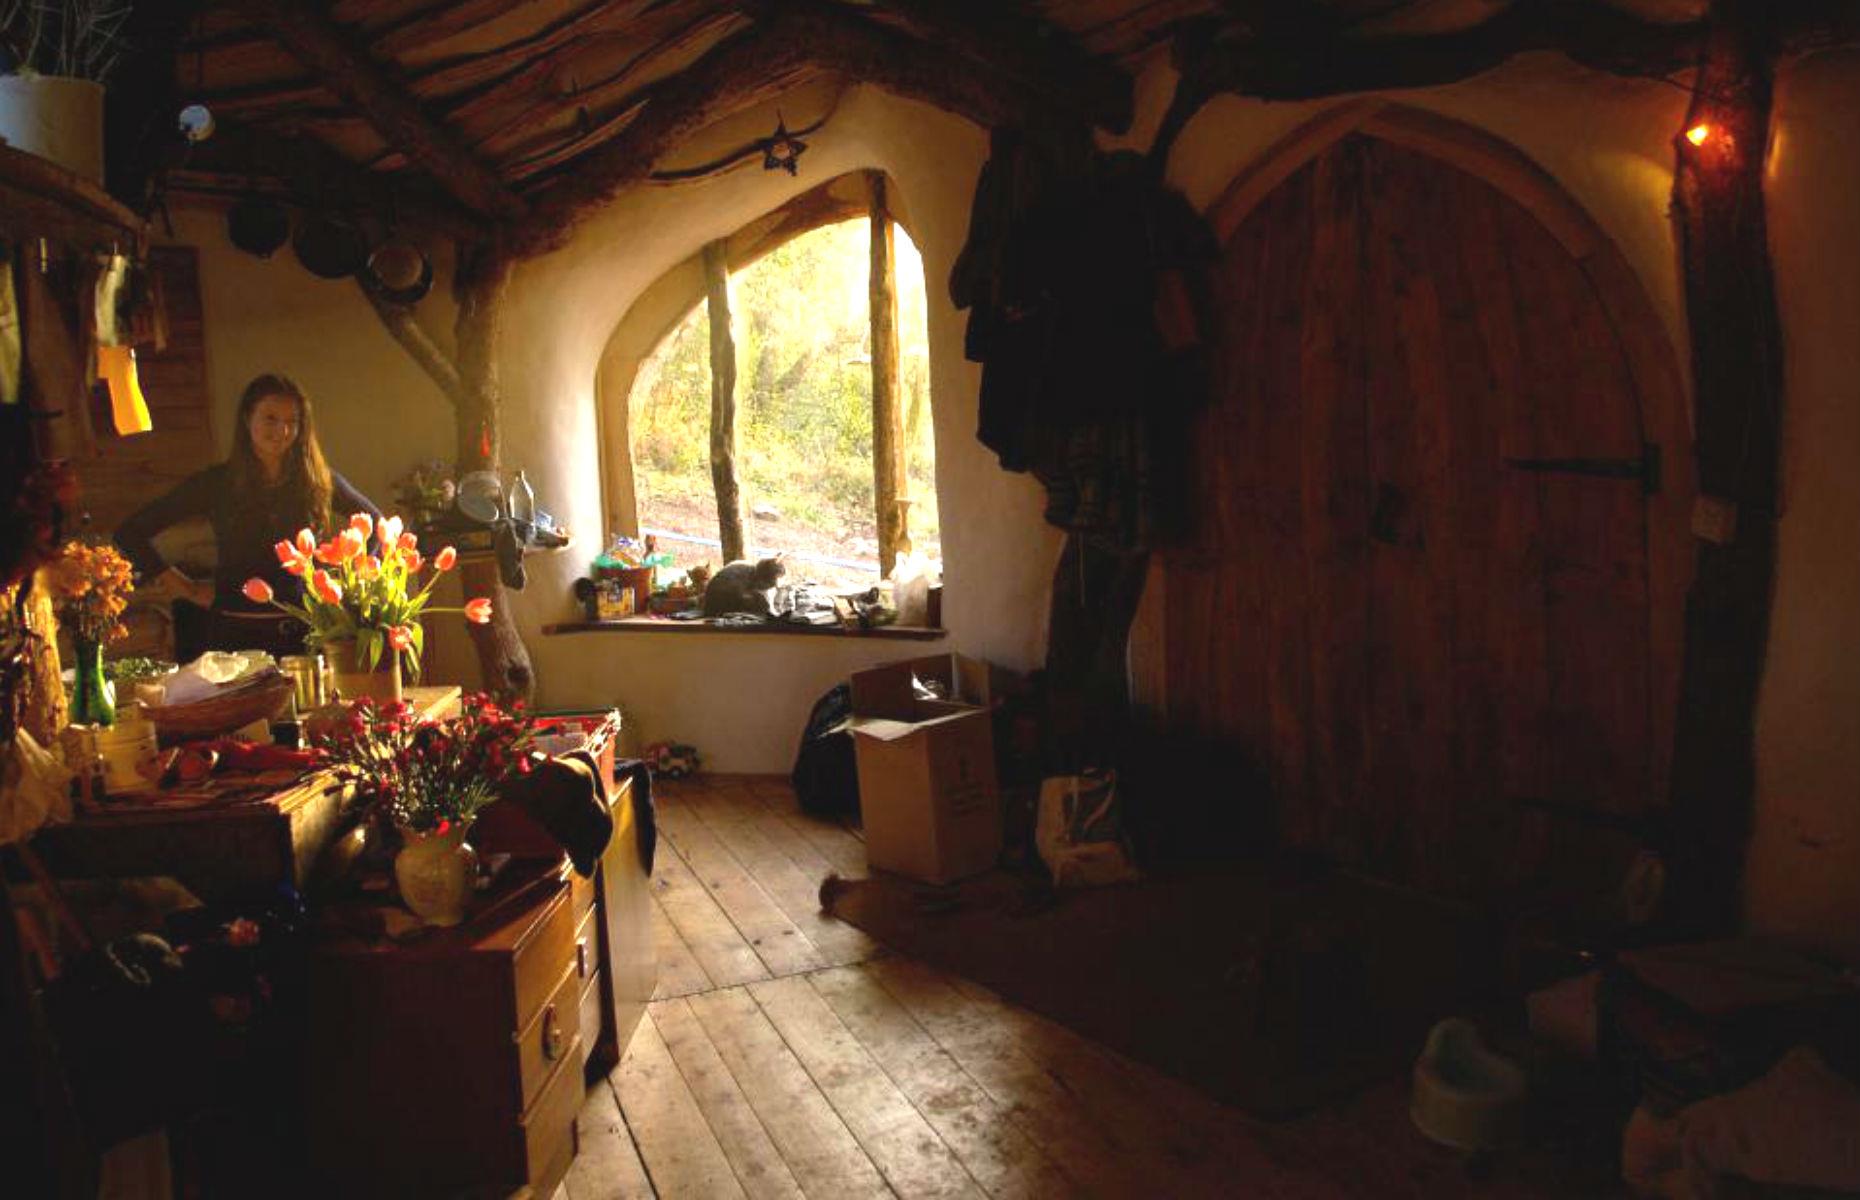 Real Life Hobbit Homes That Put The Shire To Shame